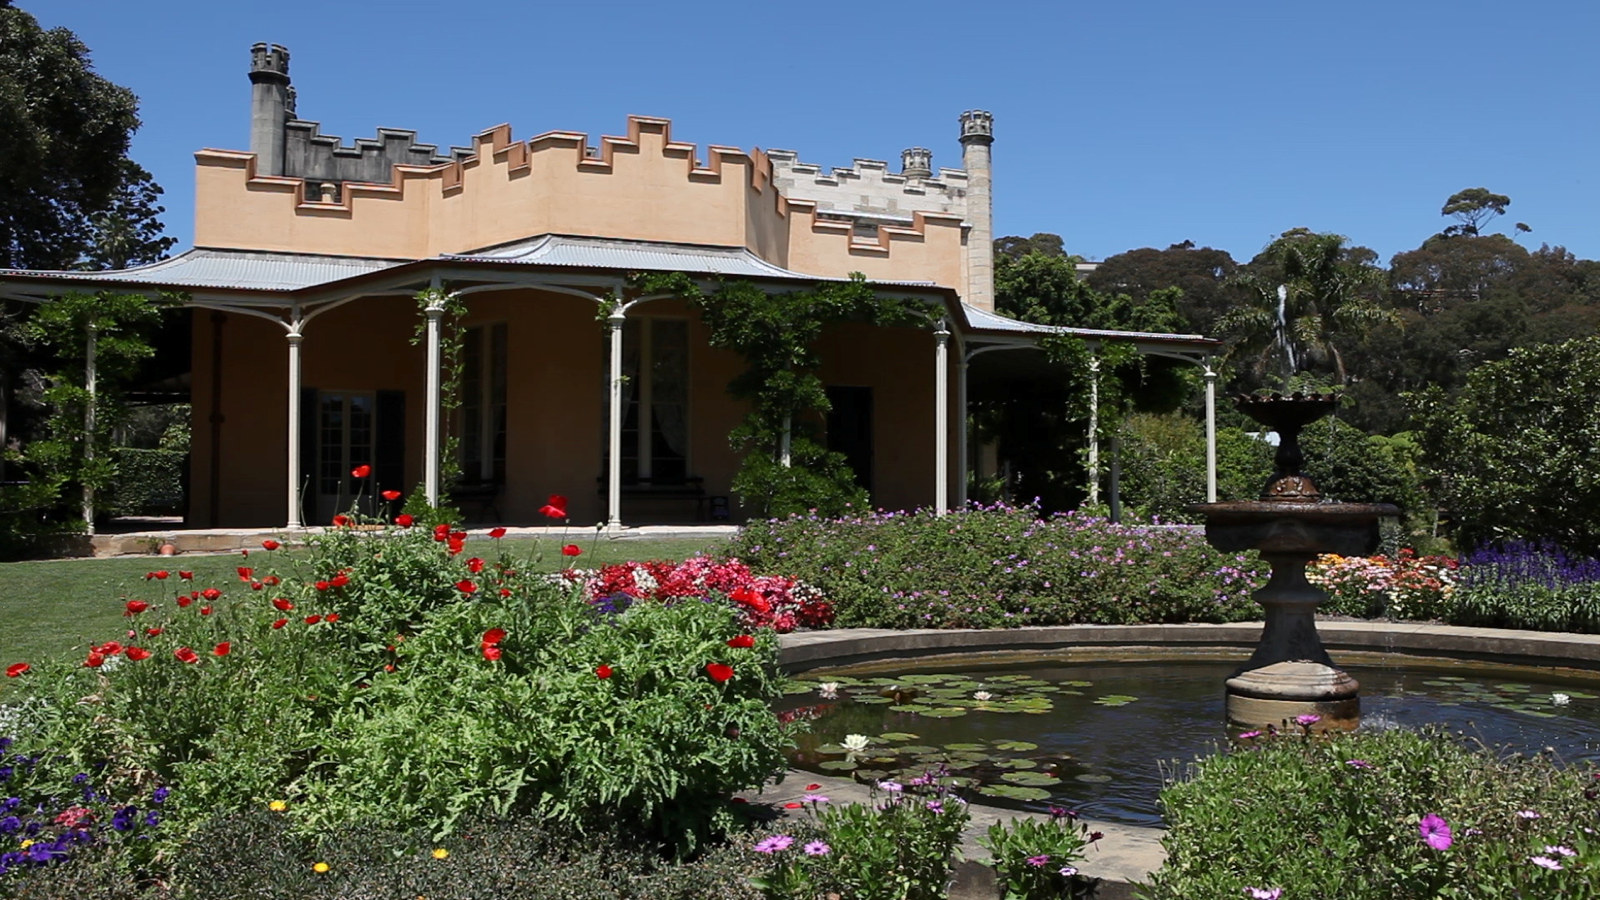 Image of the front of Vaucluse house with the gardens in full bloom. A fountain appears in the foreground squirting water.